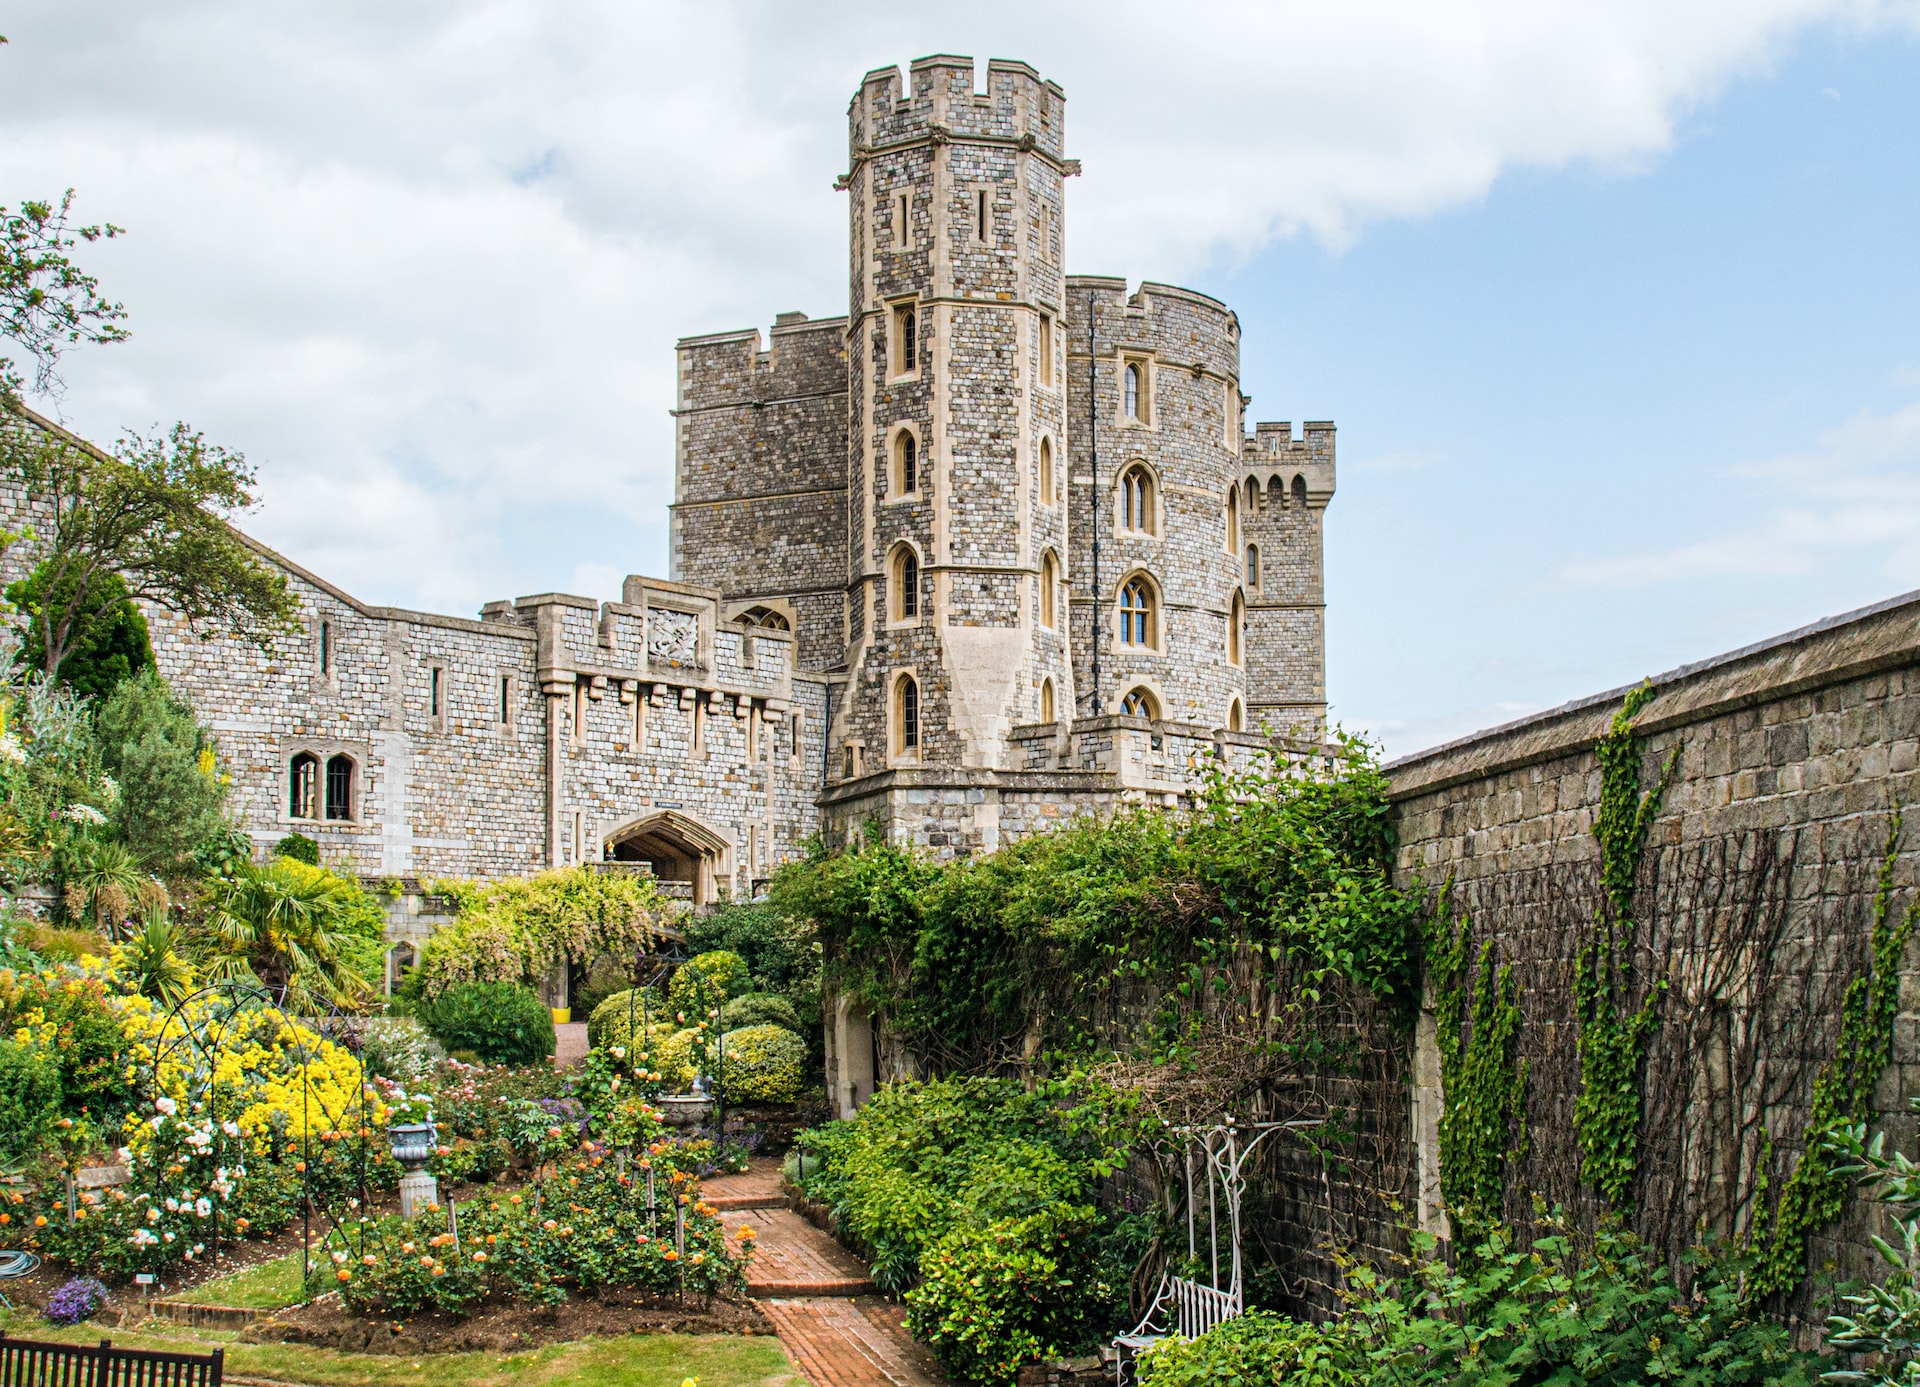 The walled interior of Windsor Castle.